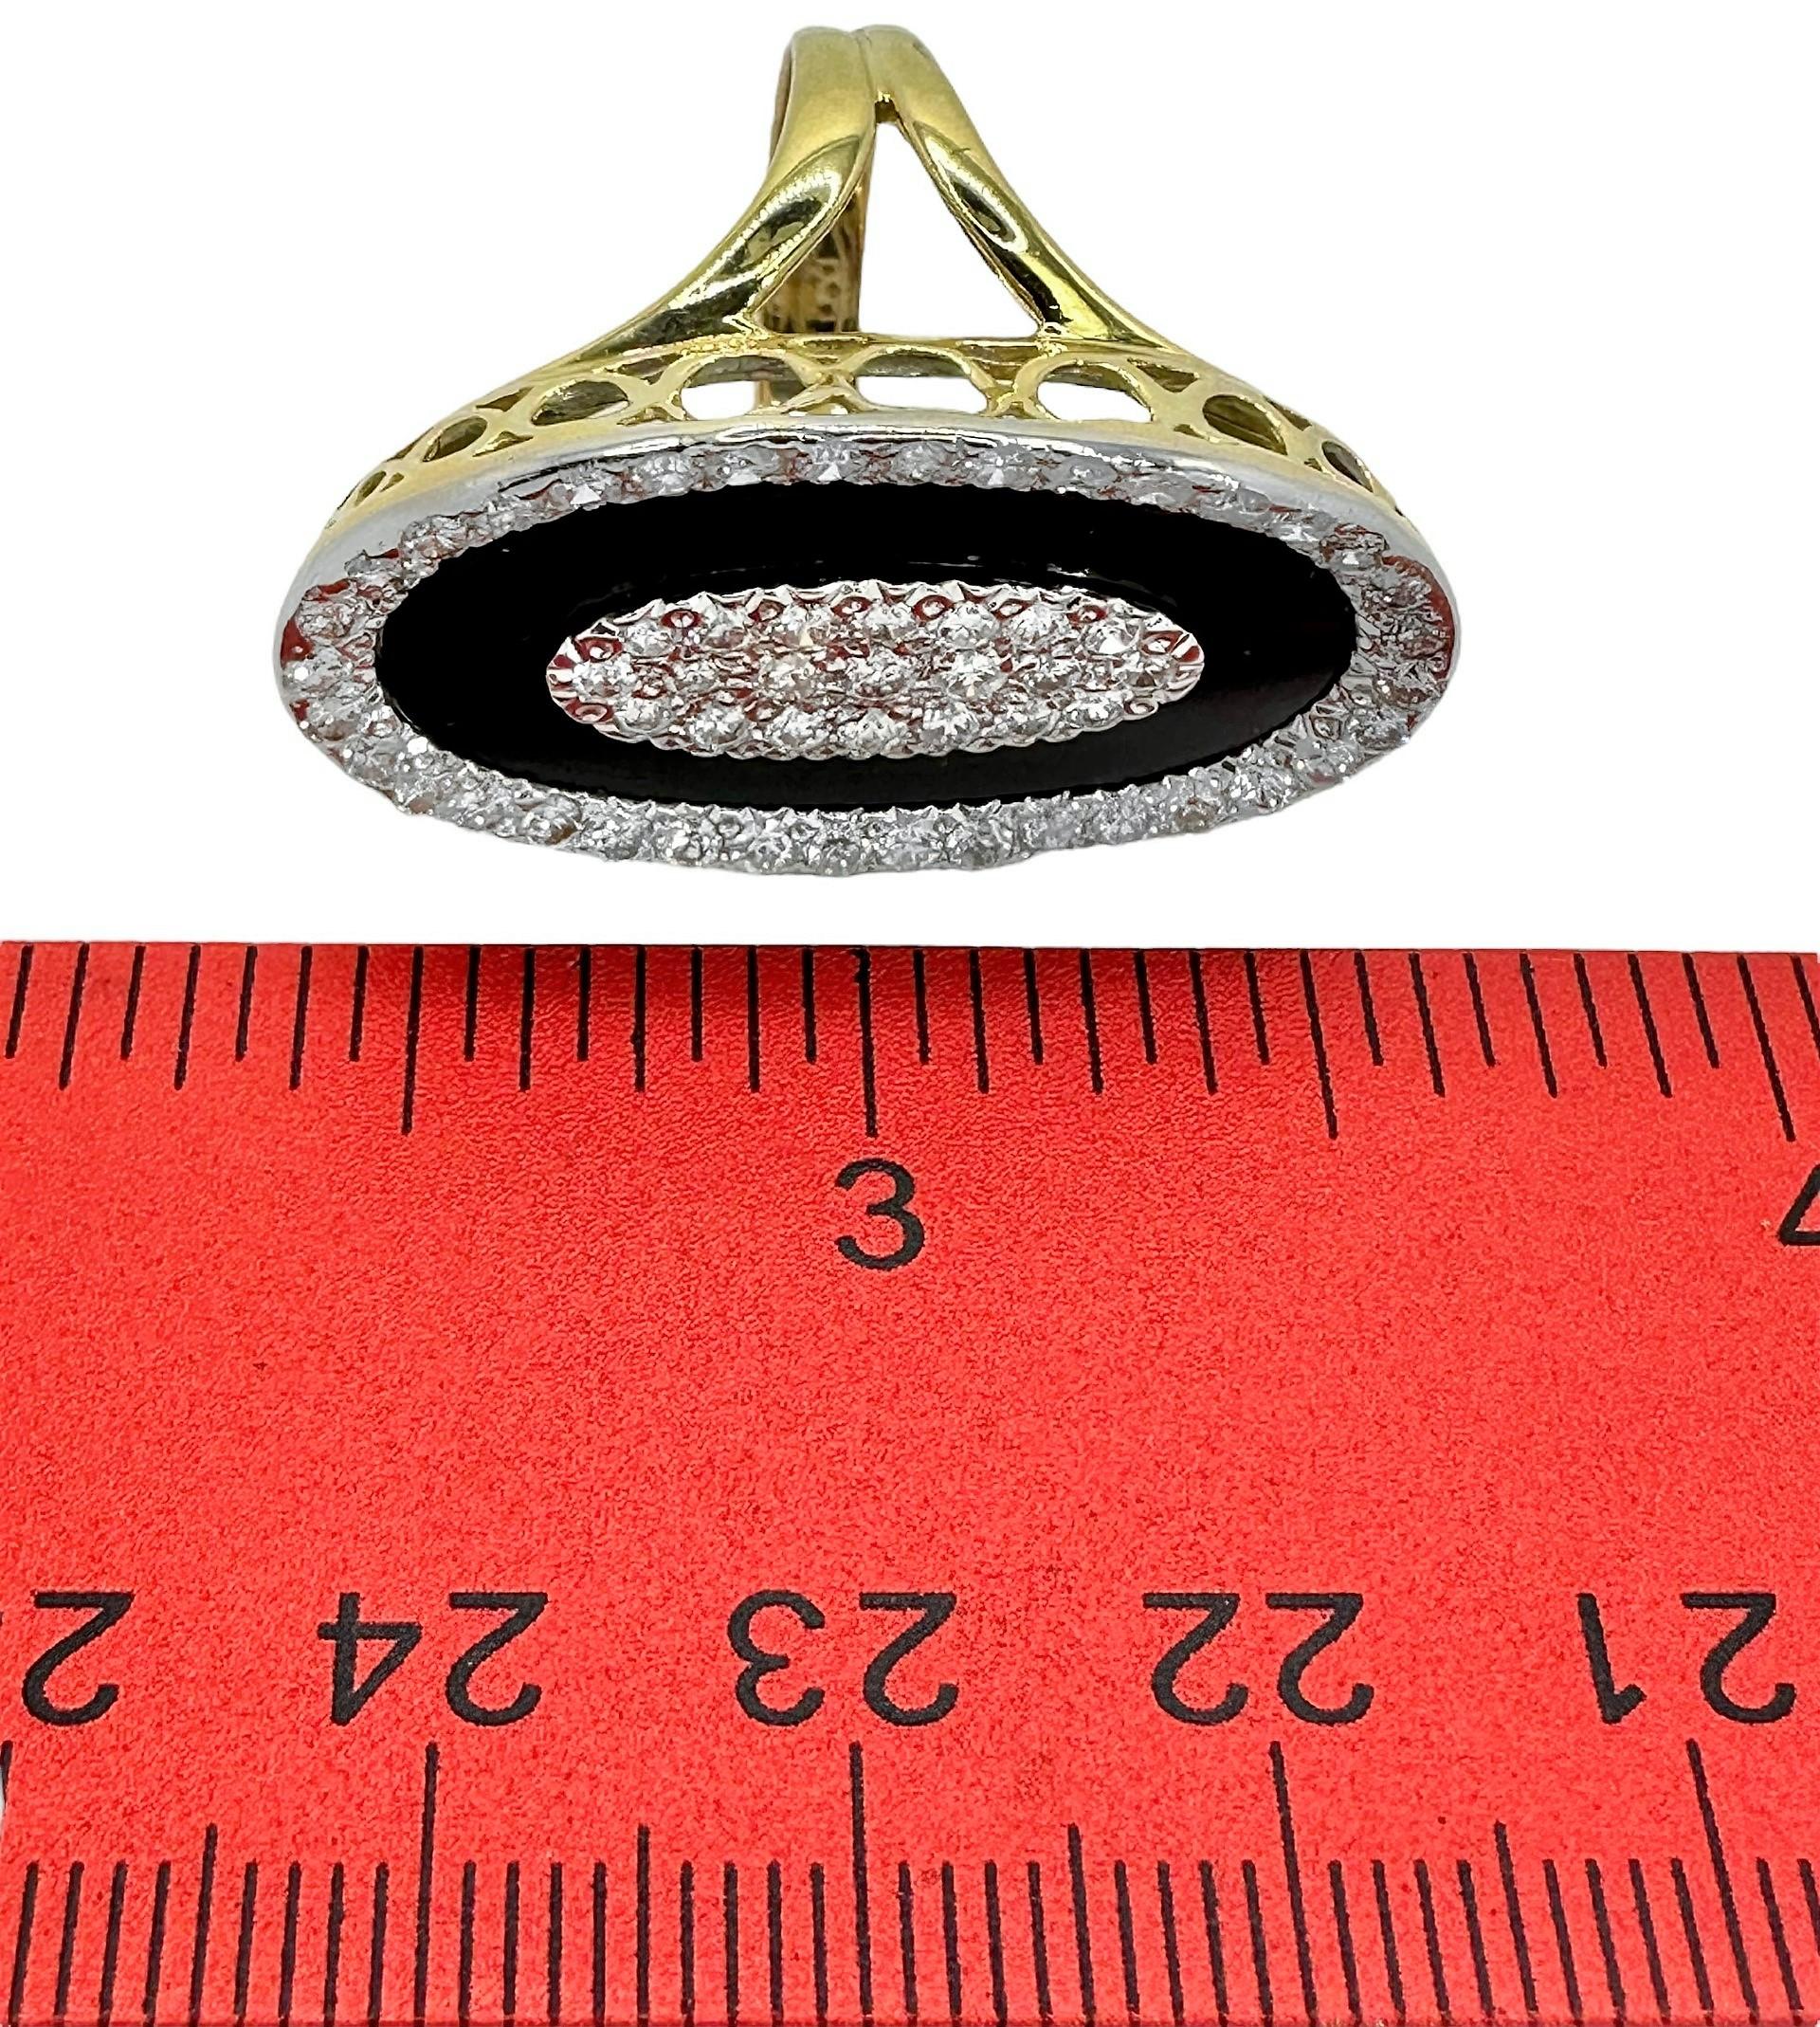 Onyx, Diamond and 18K Gold, Oval Shaped Ring, 1.25 Inches Long by .75 Inch Wide For Sale 2